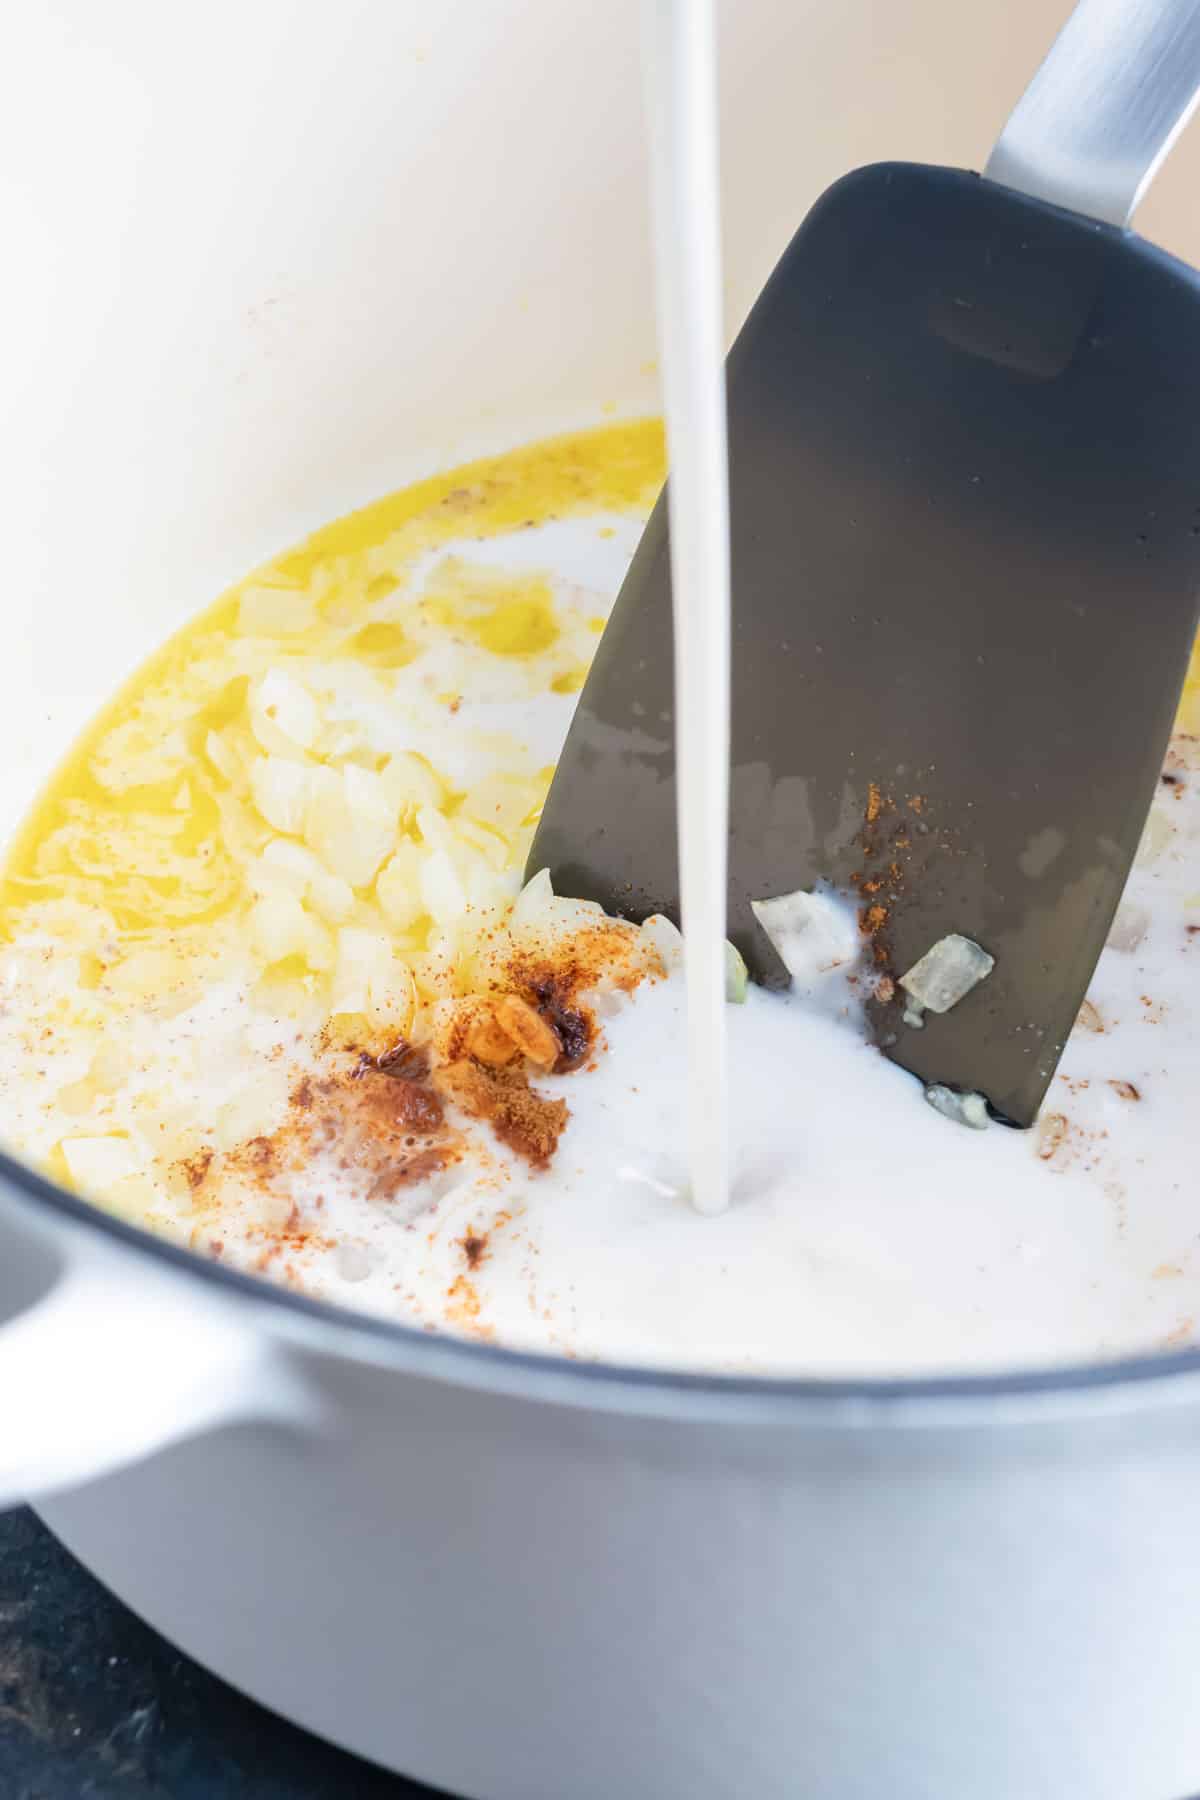 Coconut milk being poured into a Dutch oven to show how to make butternut squash soup.